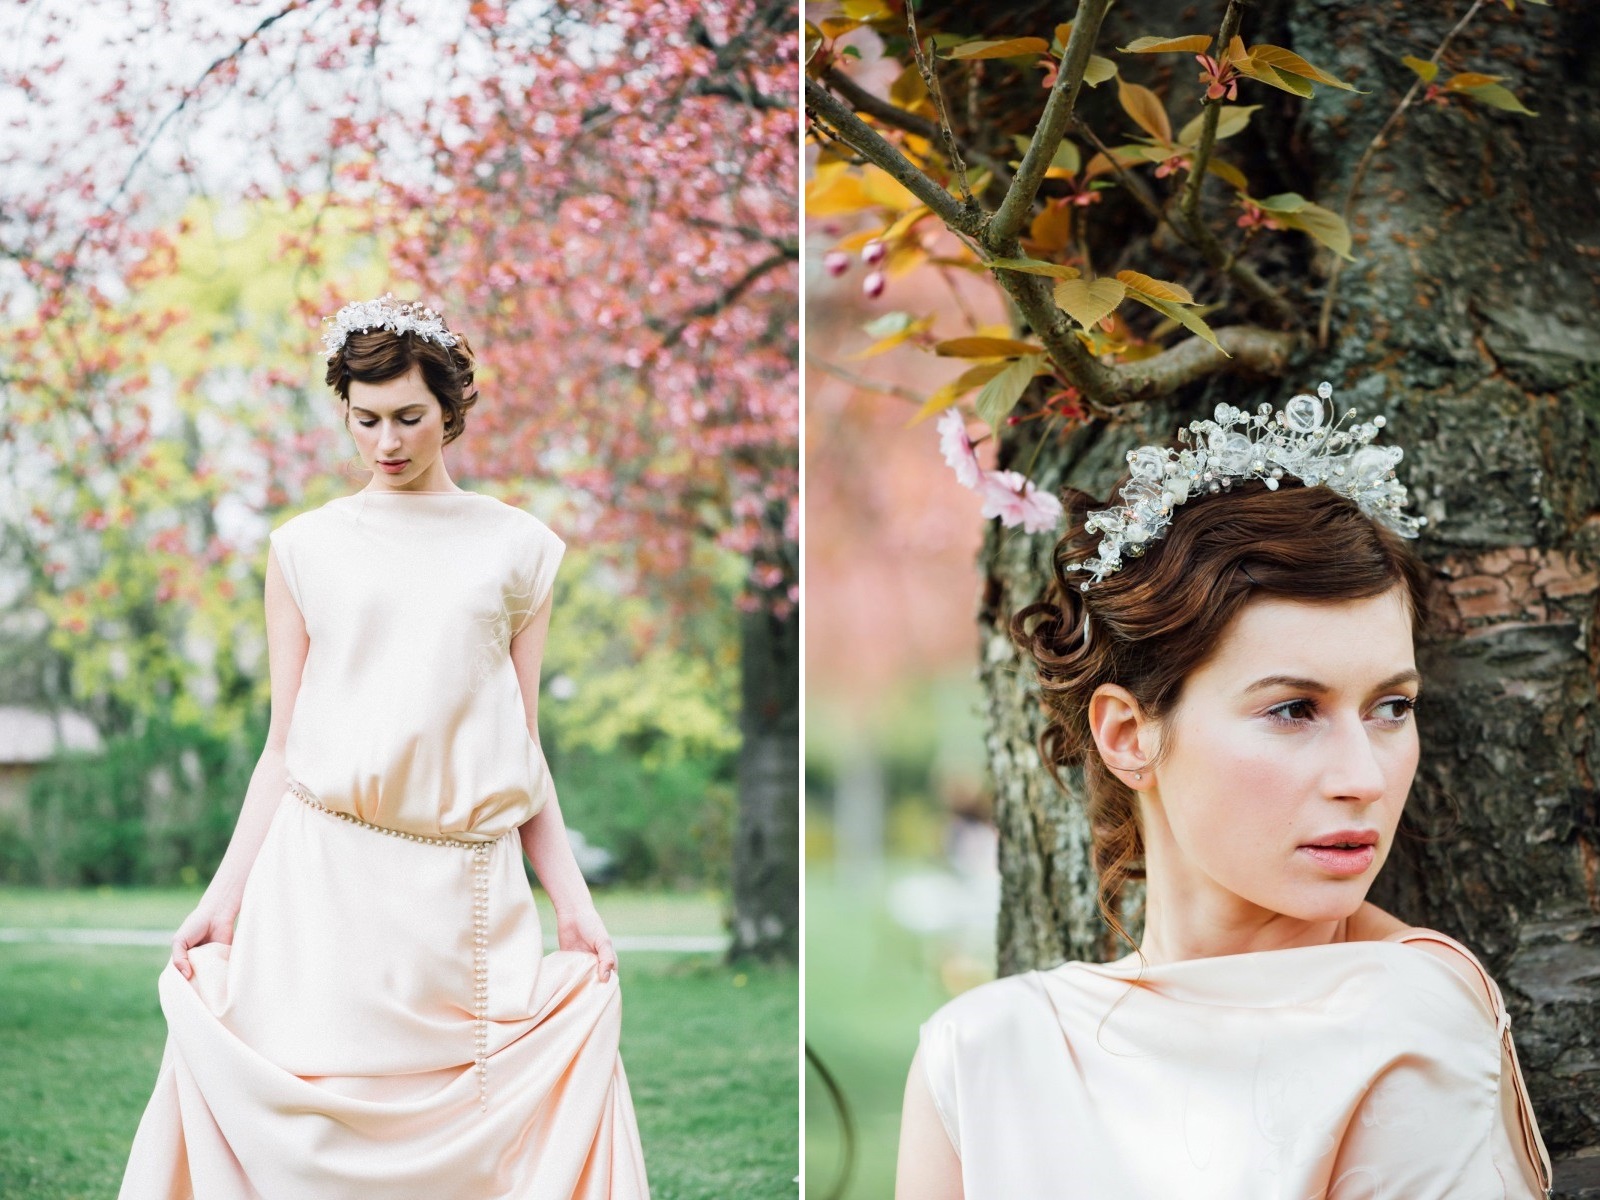 A Dreamy Blossom Filled Bridal Shoot with a Touch of Art Deco Elegance